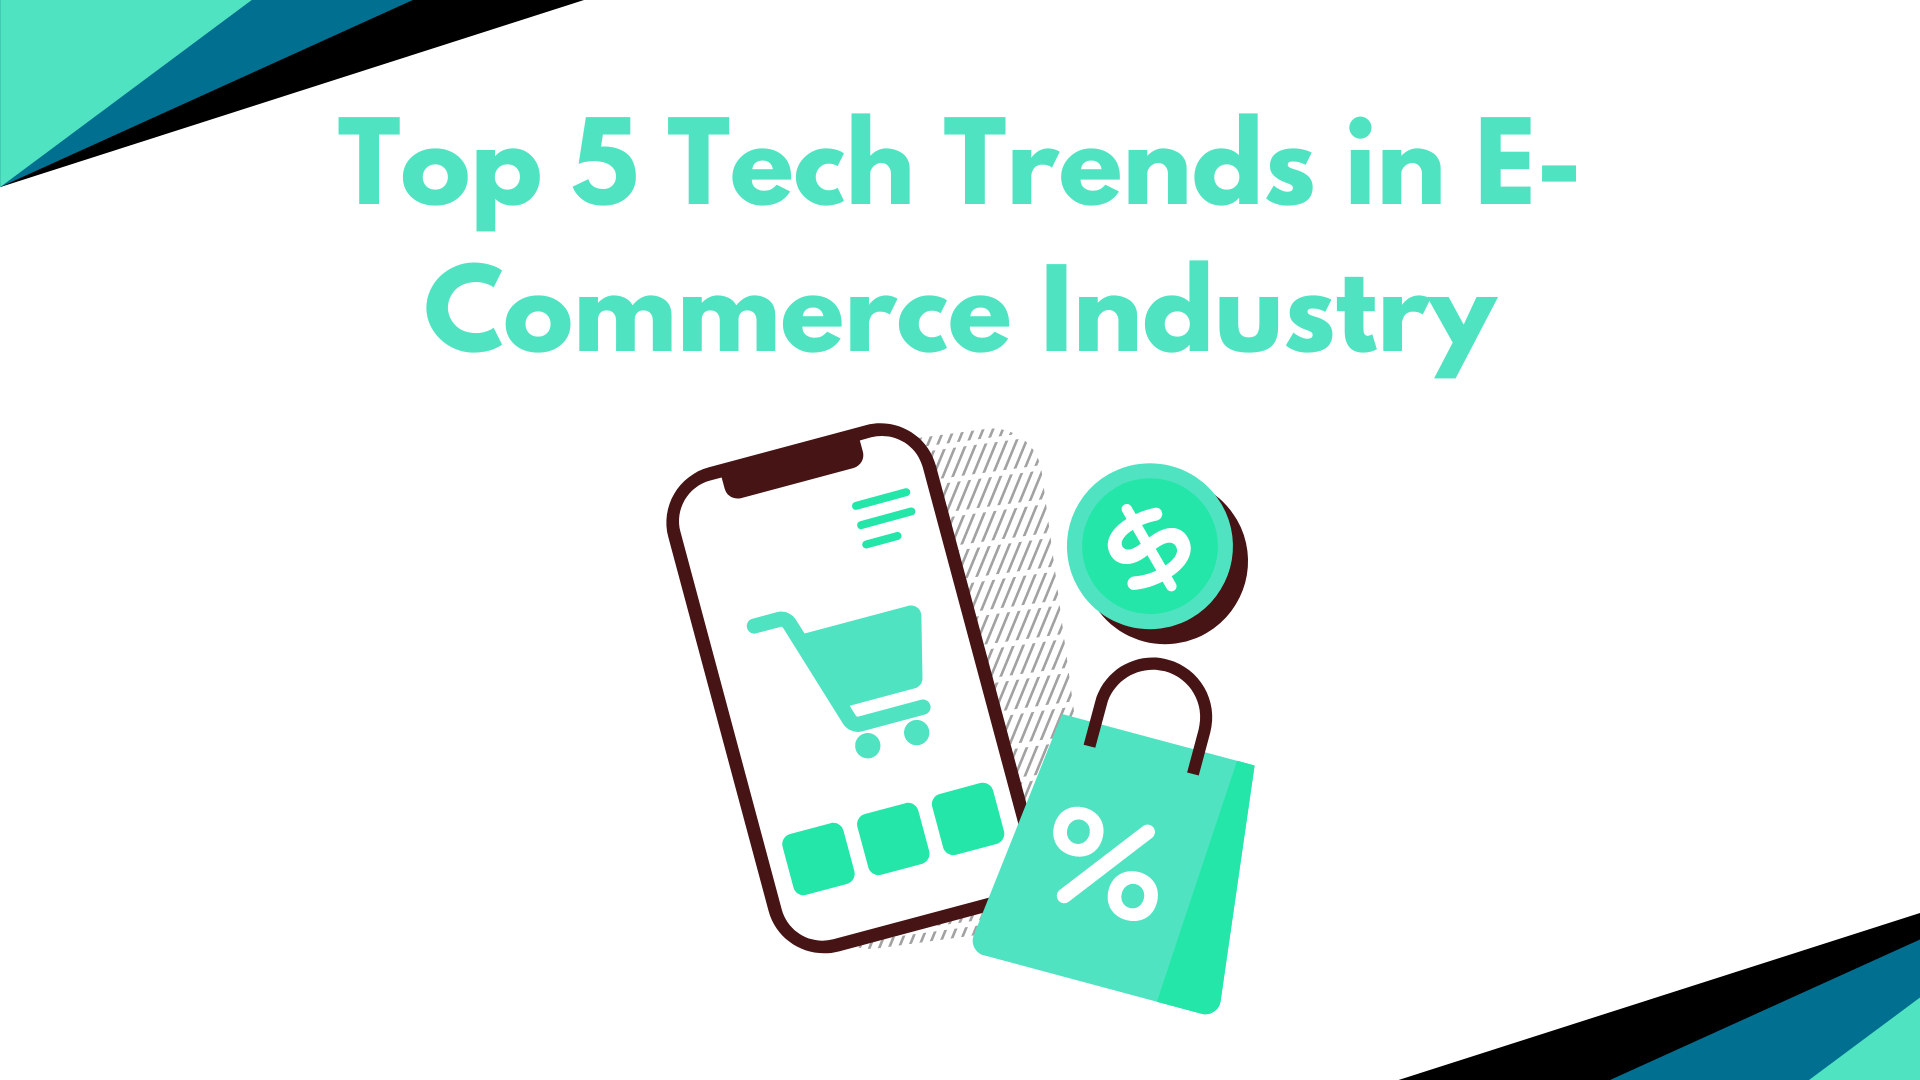 Top 5 Technology Trends in E-commerce Industry